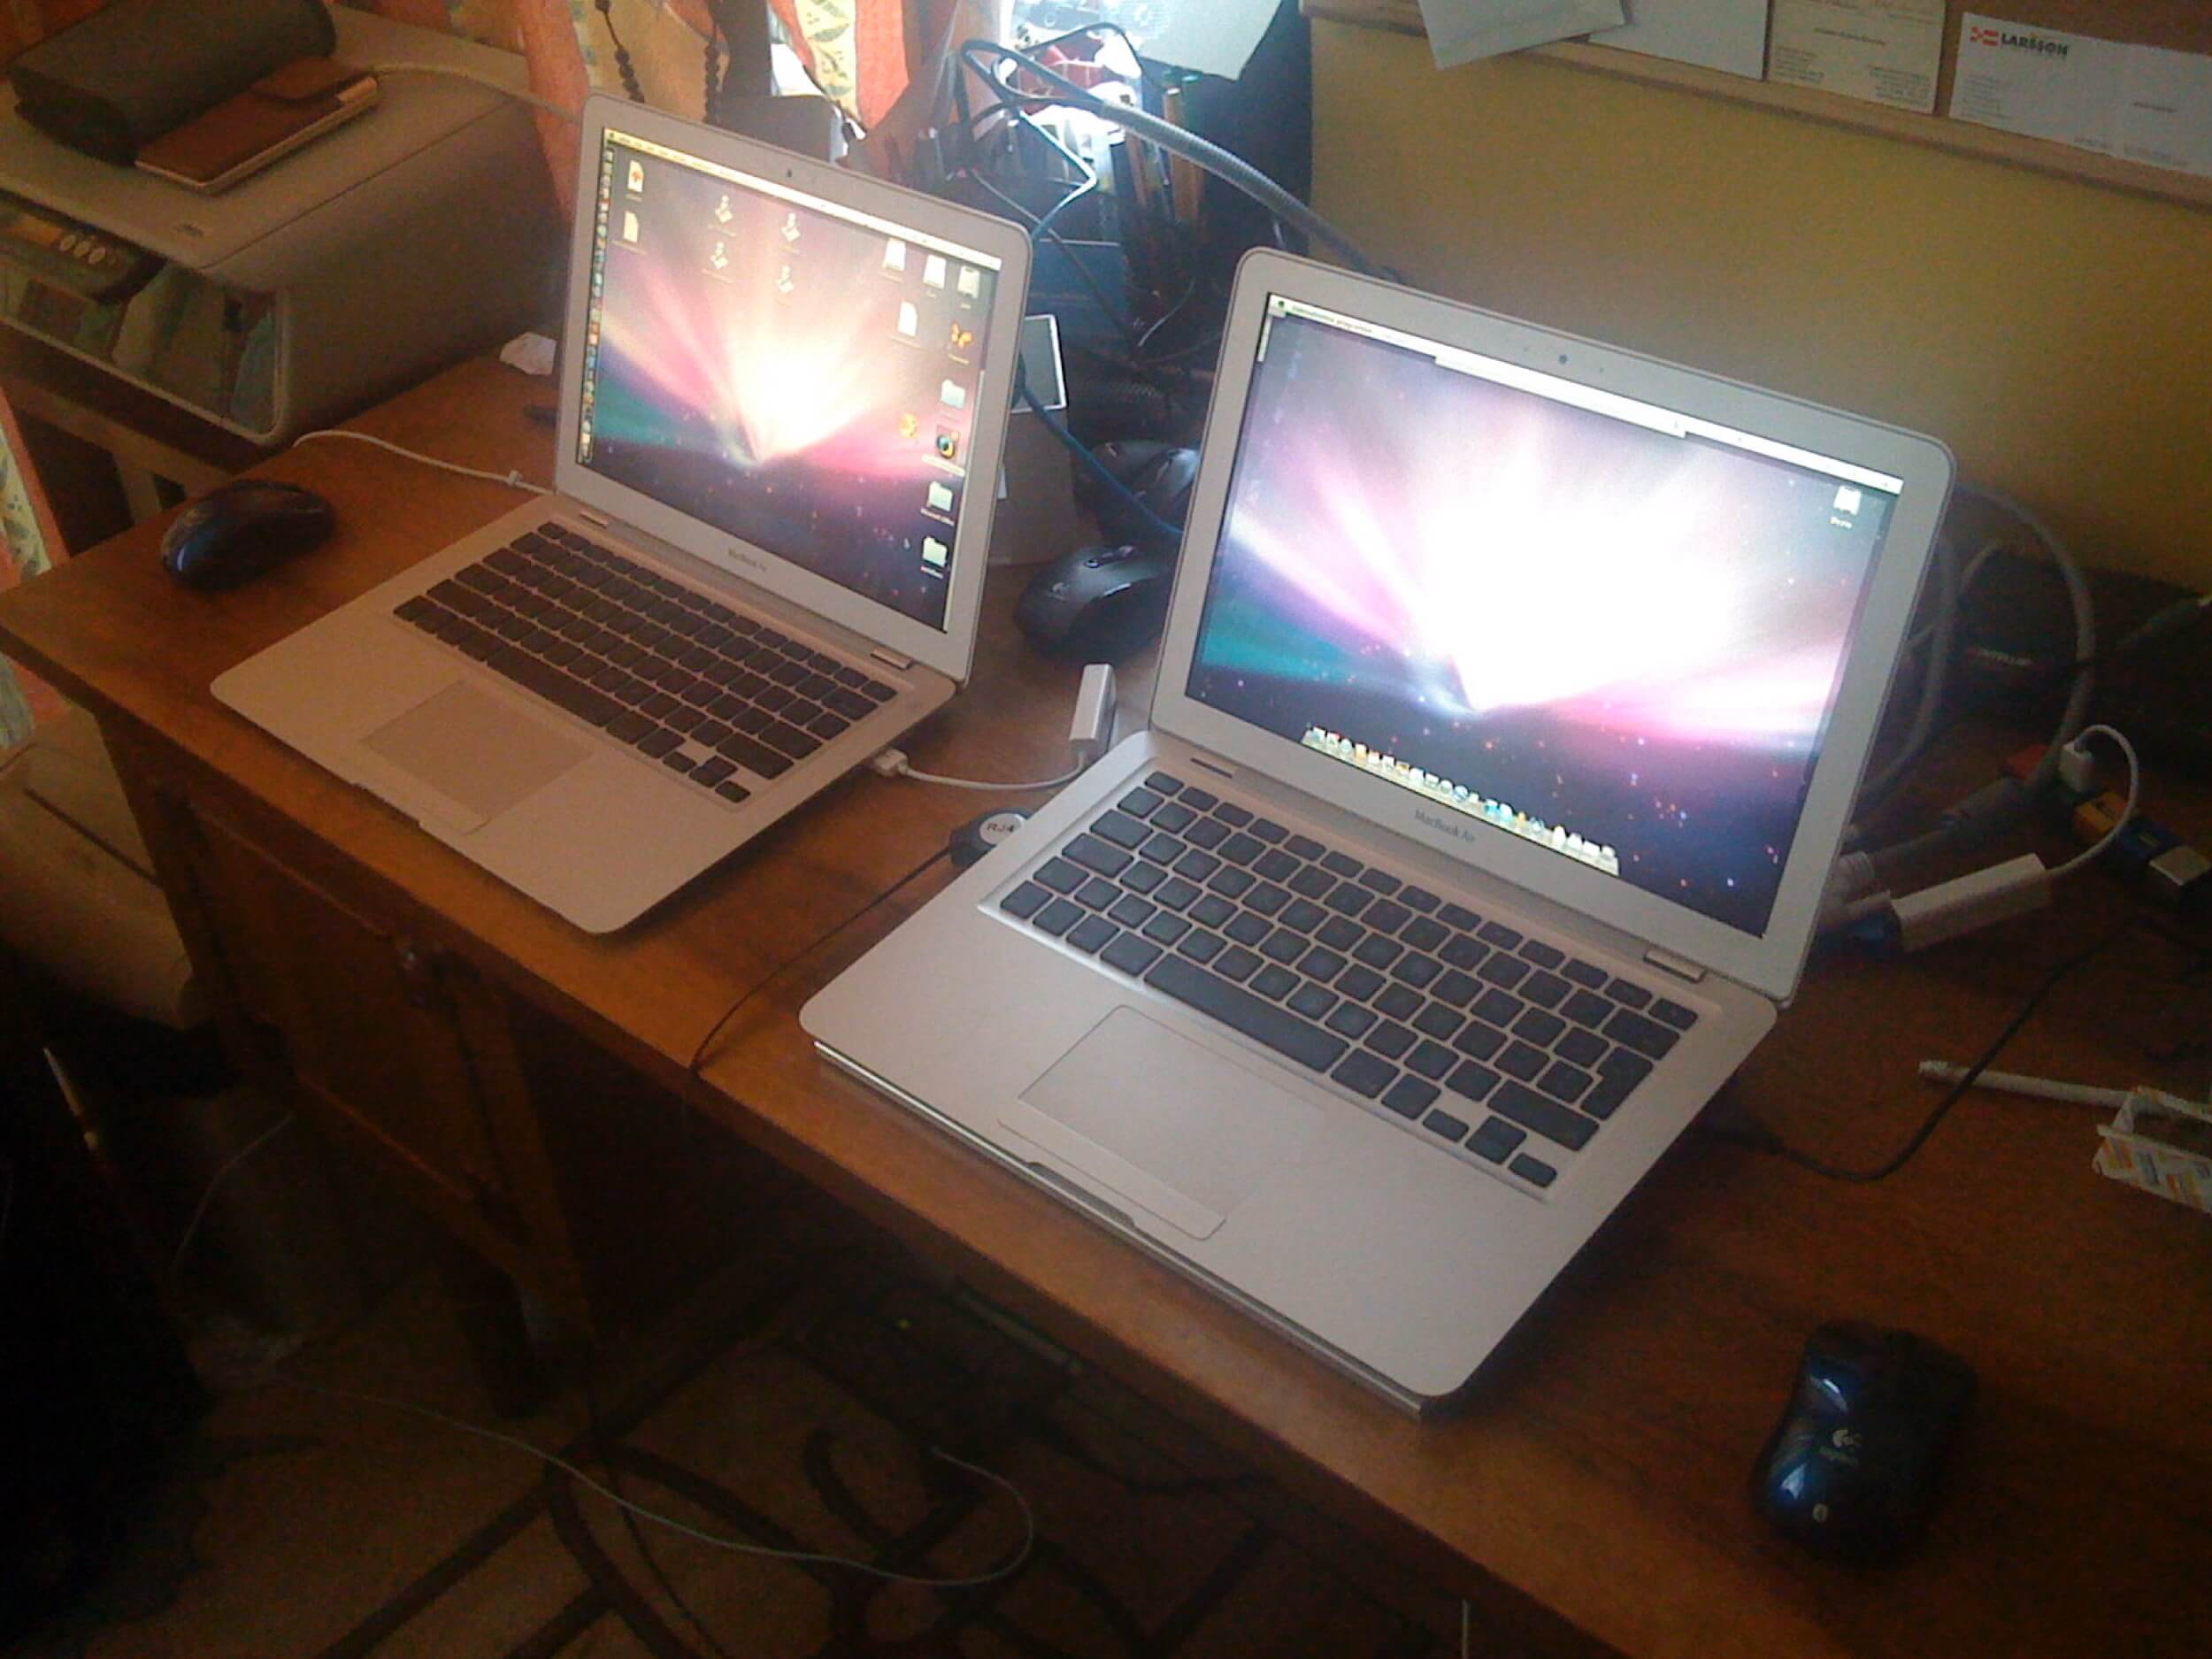 Macbook Air rocks. 5 things PC notebook manufacturers will never understand.